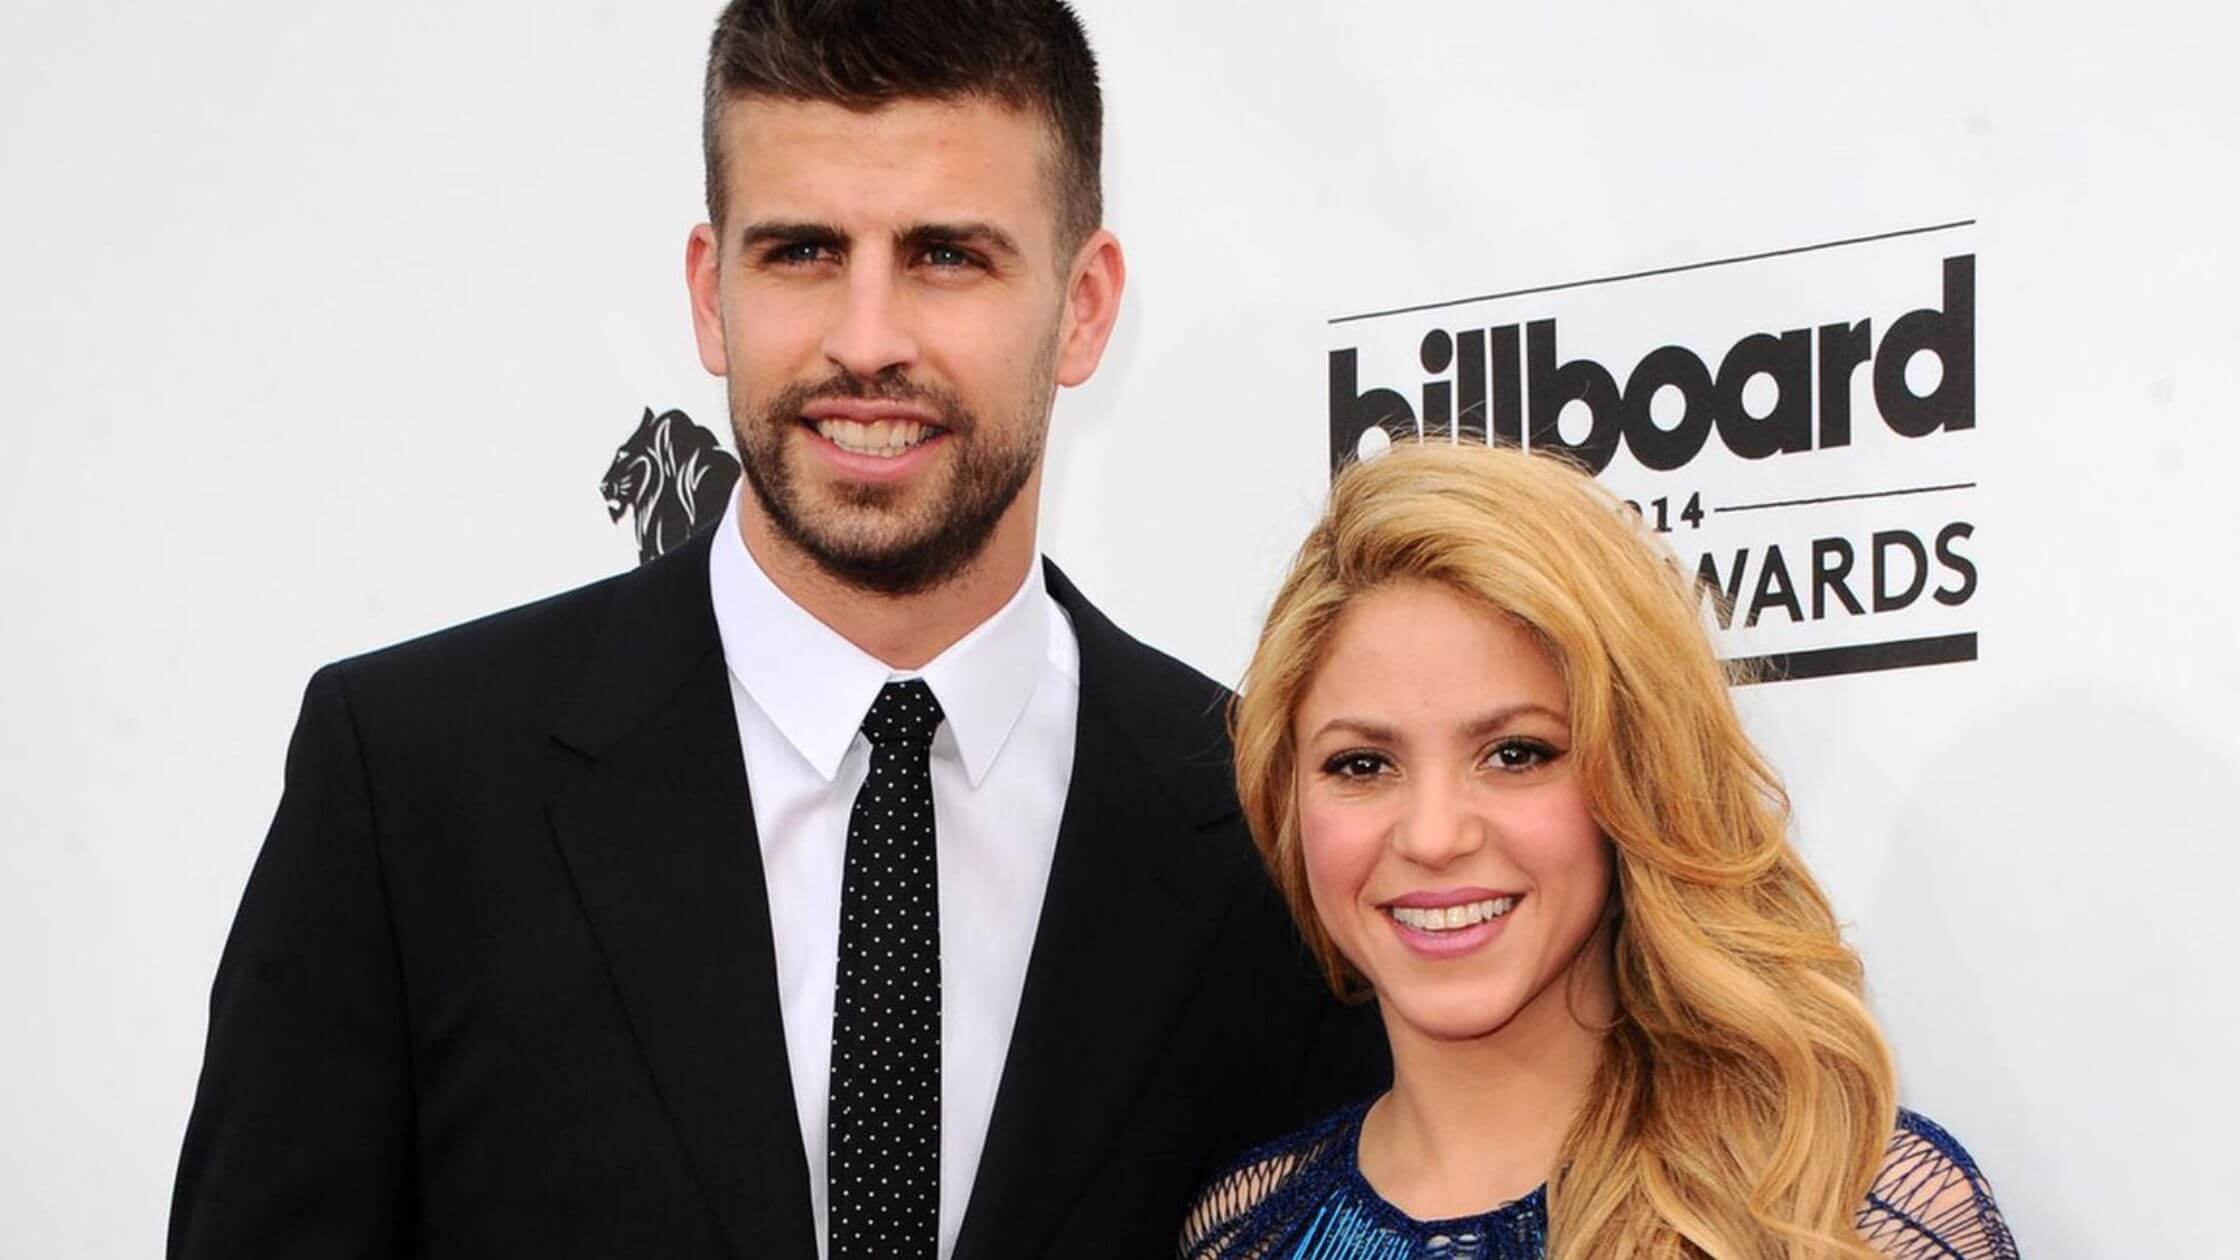 Shakira And Gerard Piqué Break Up After Being Together For 11 Years